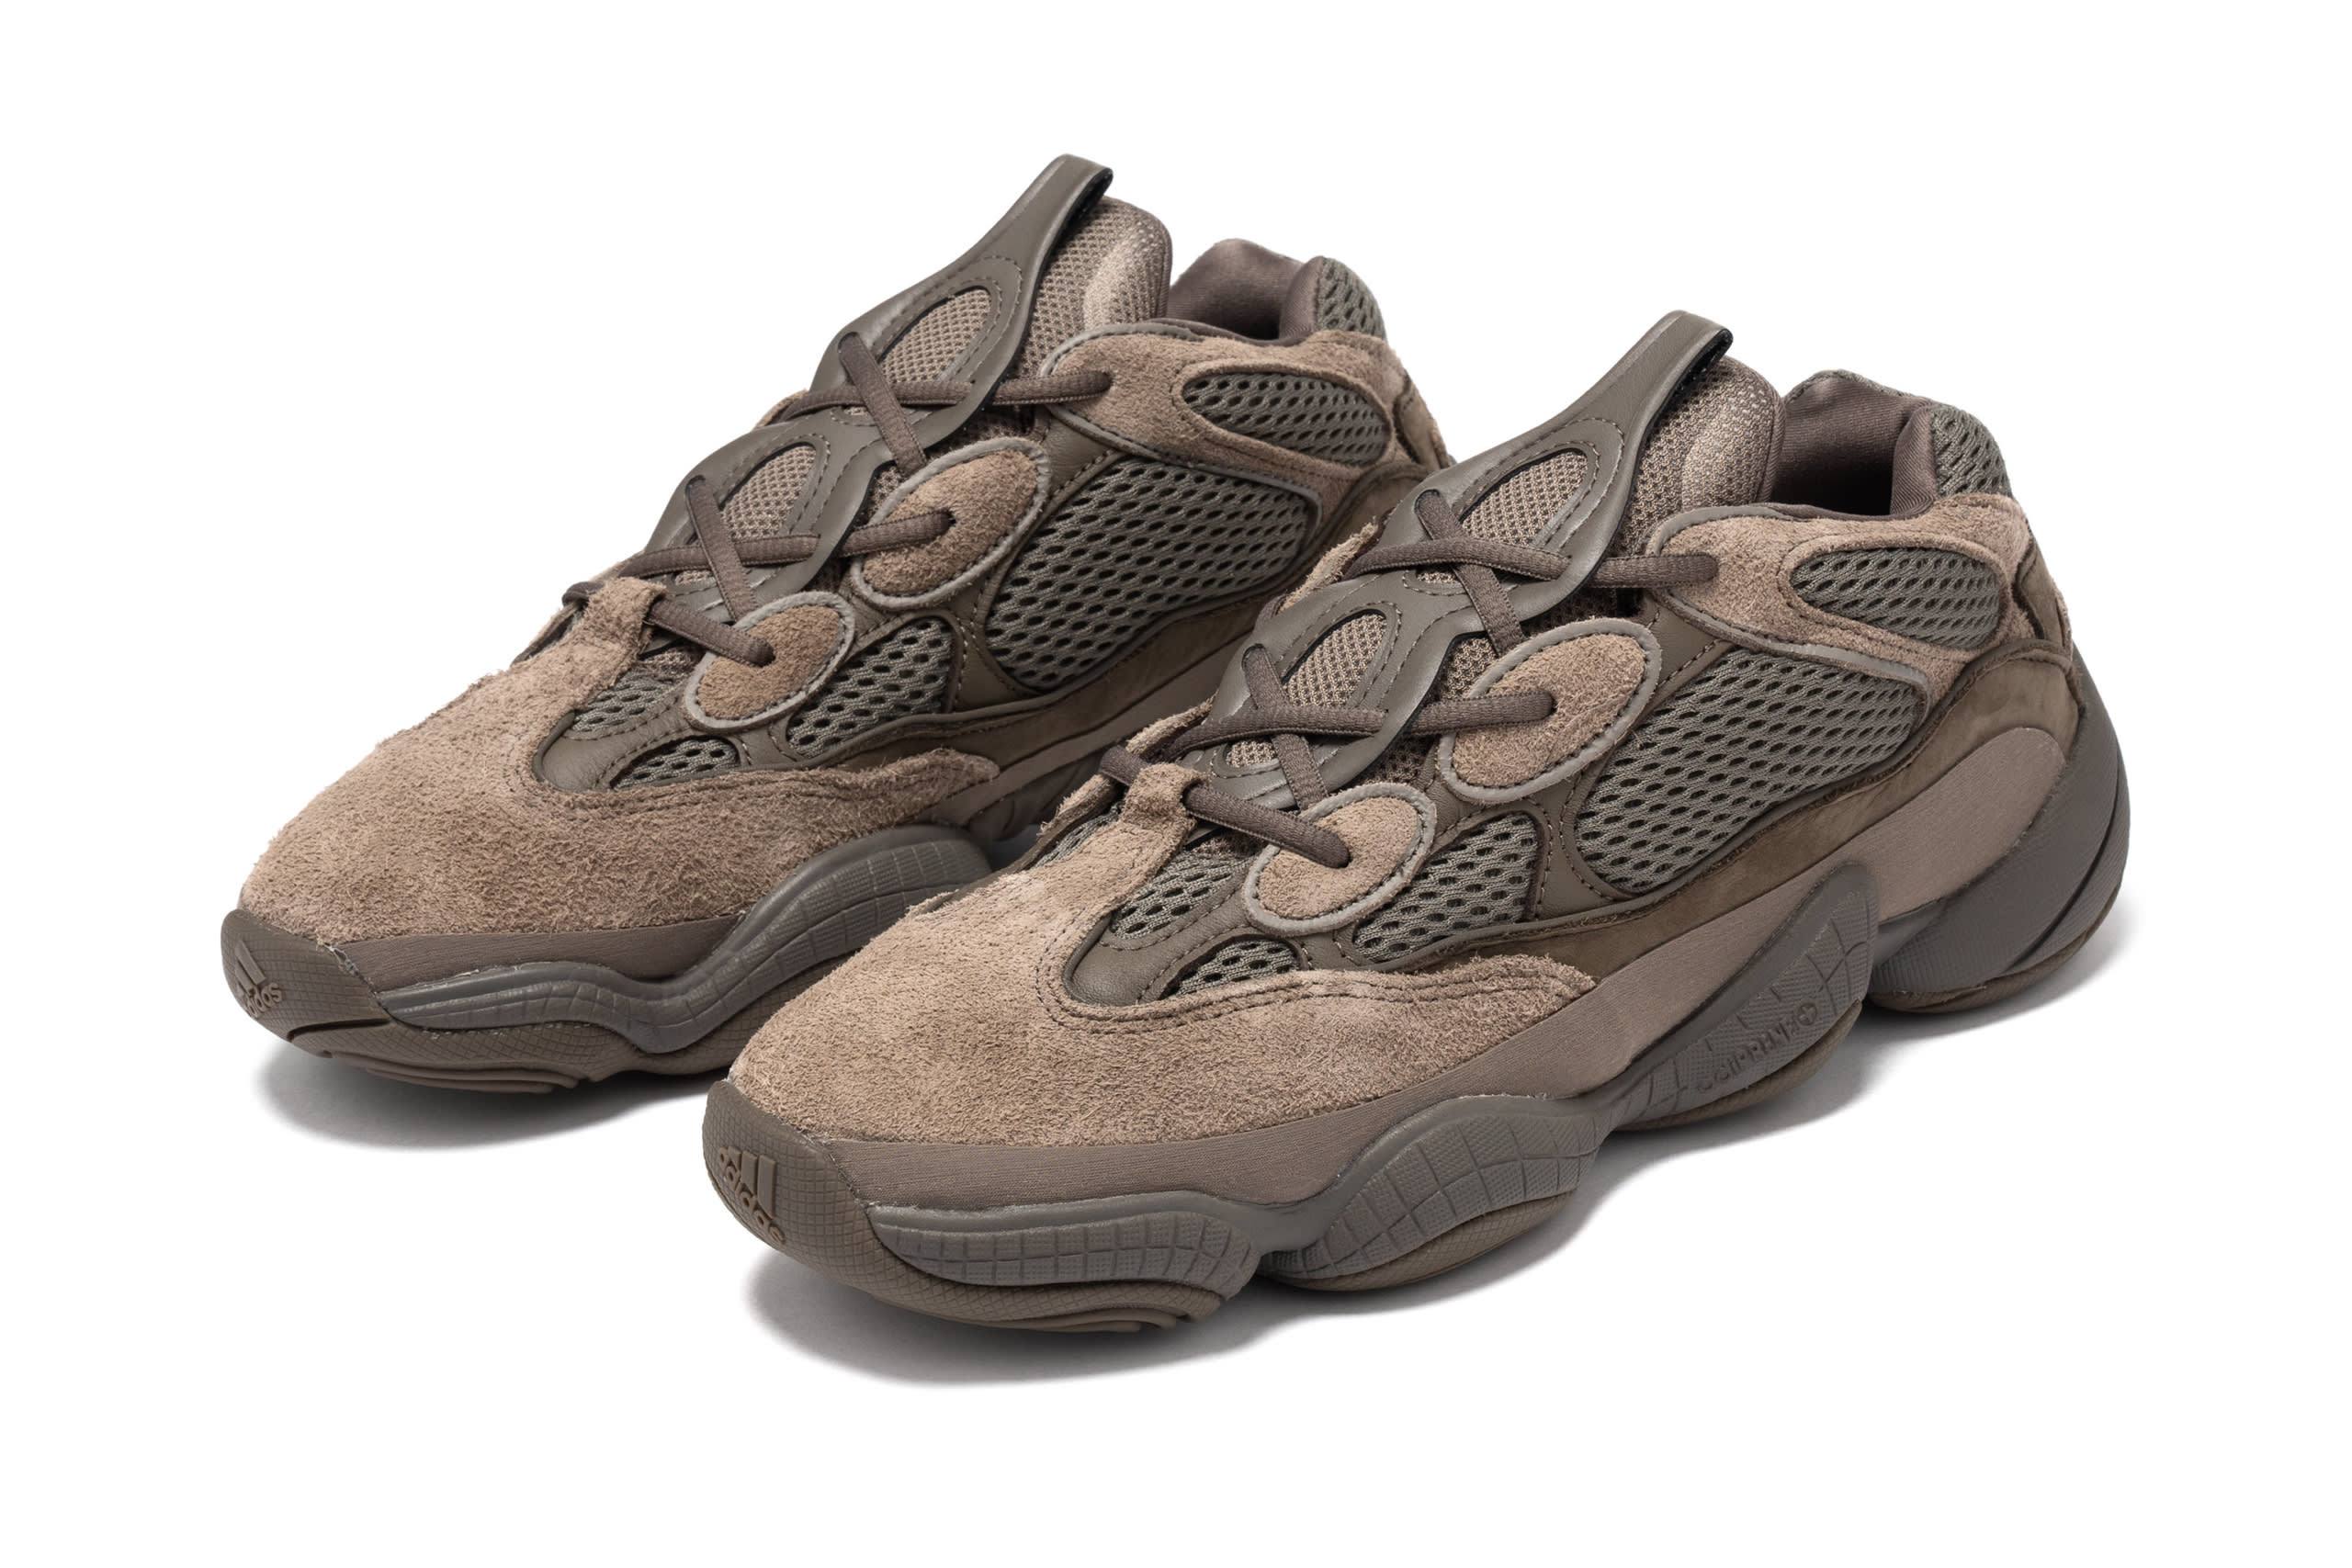 Continental Bøje Arving adidas YEEZY 500 'Clay Brown' | Release Date: 10.30.21 | HAVEN